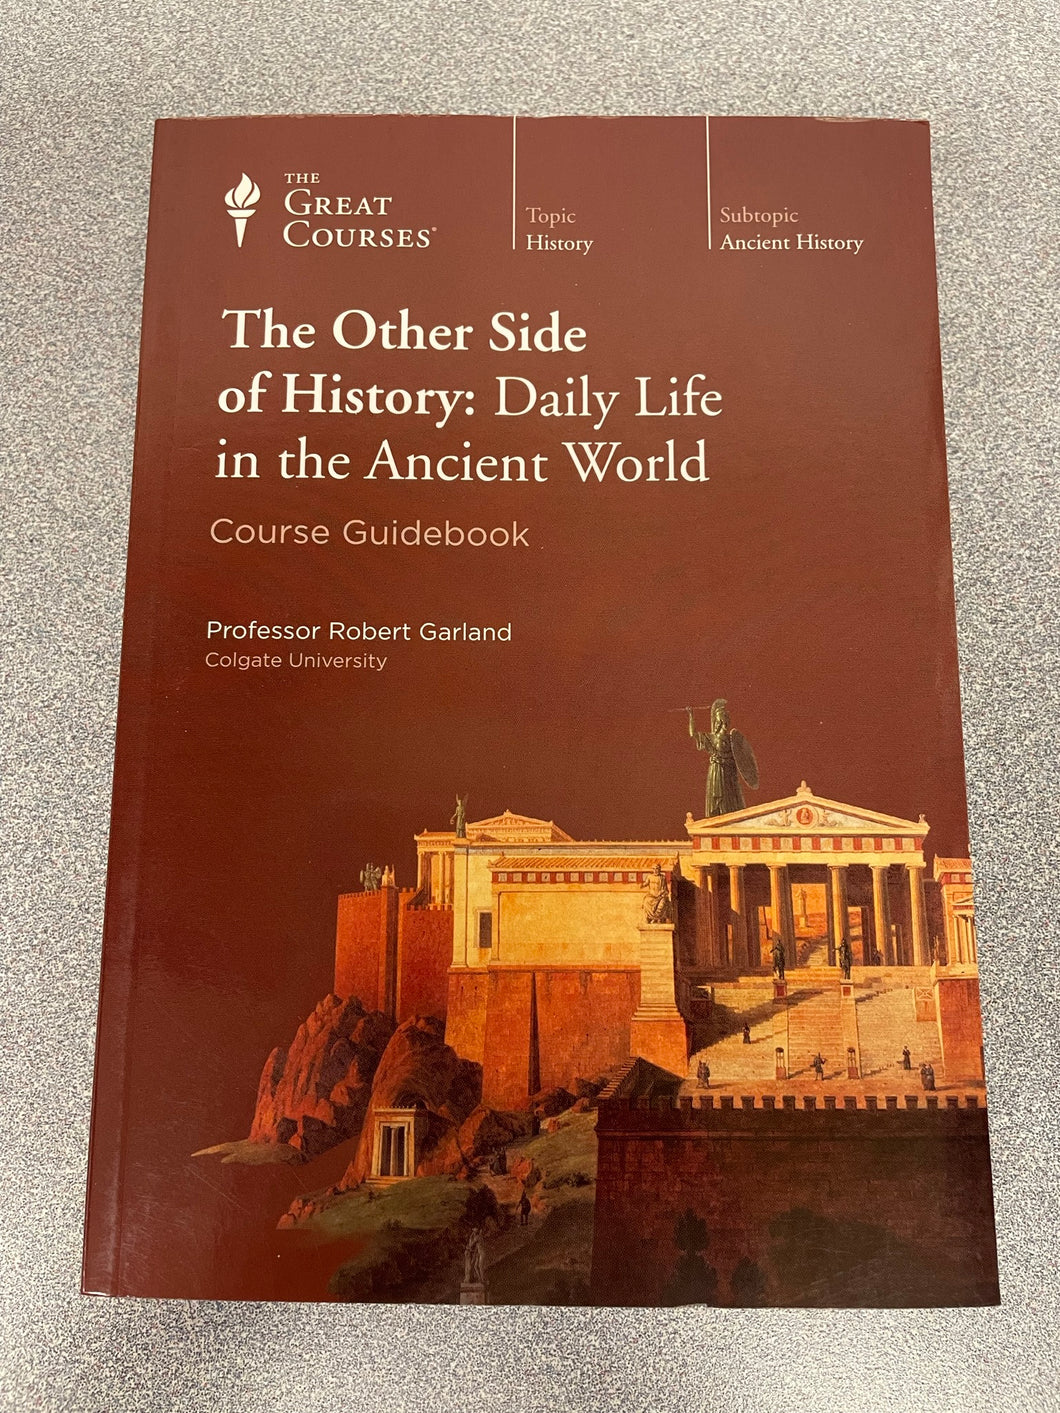 The Other Side of History: Daily Life in the Ancient World Course Guidebook, Garland, Robert [2012] GC 12/22